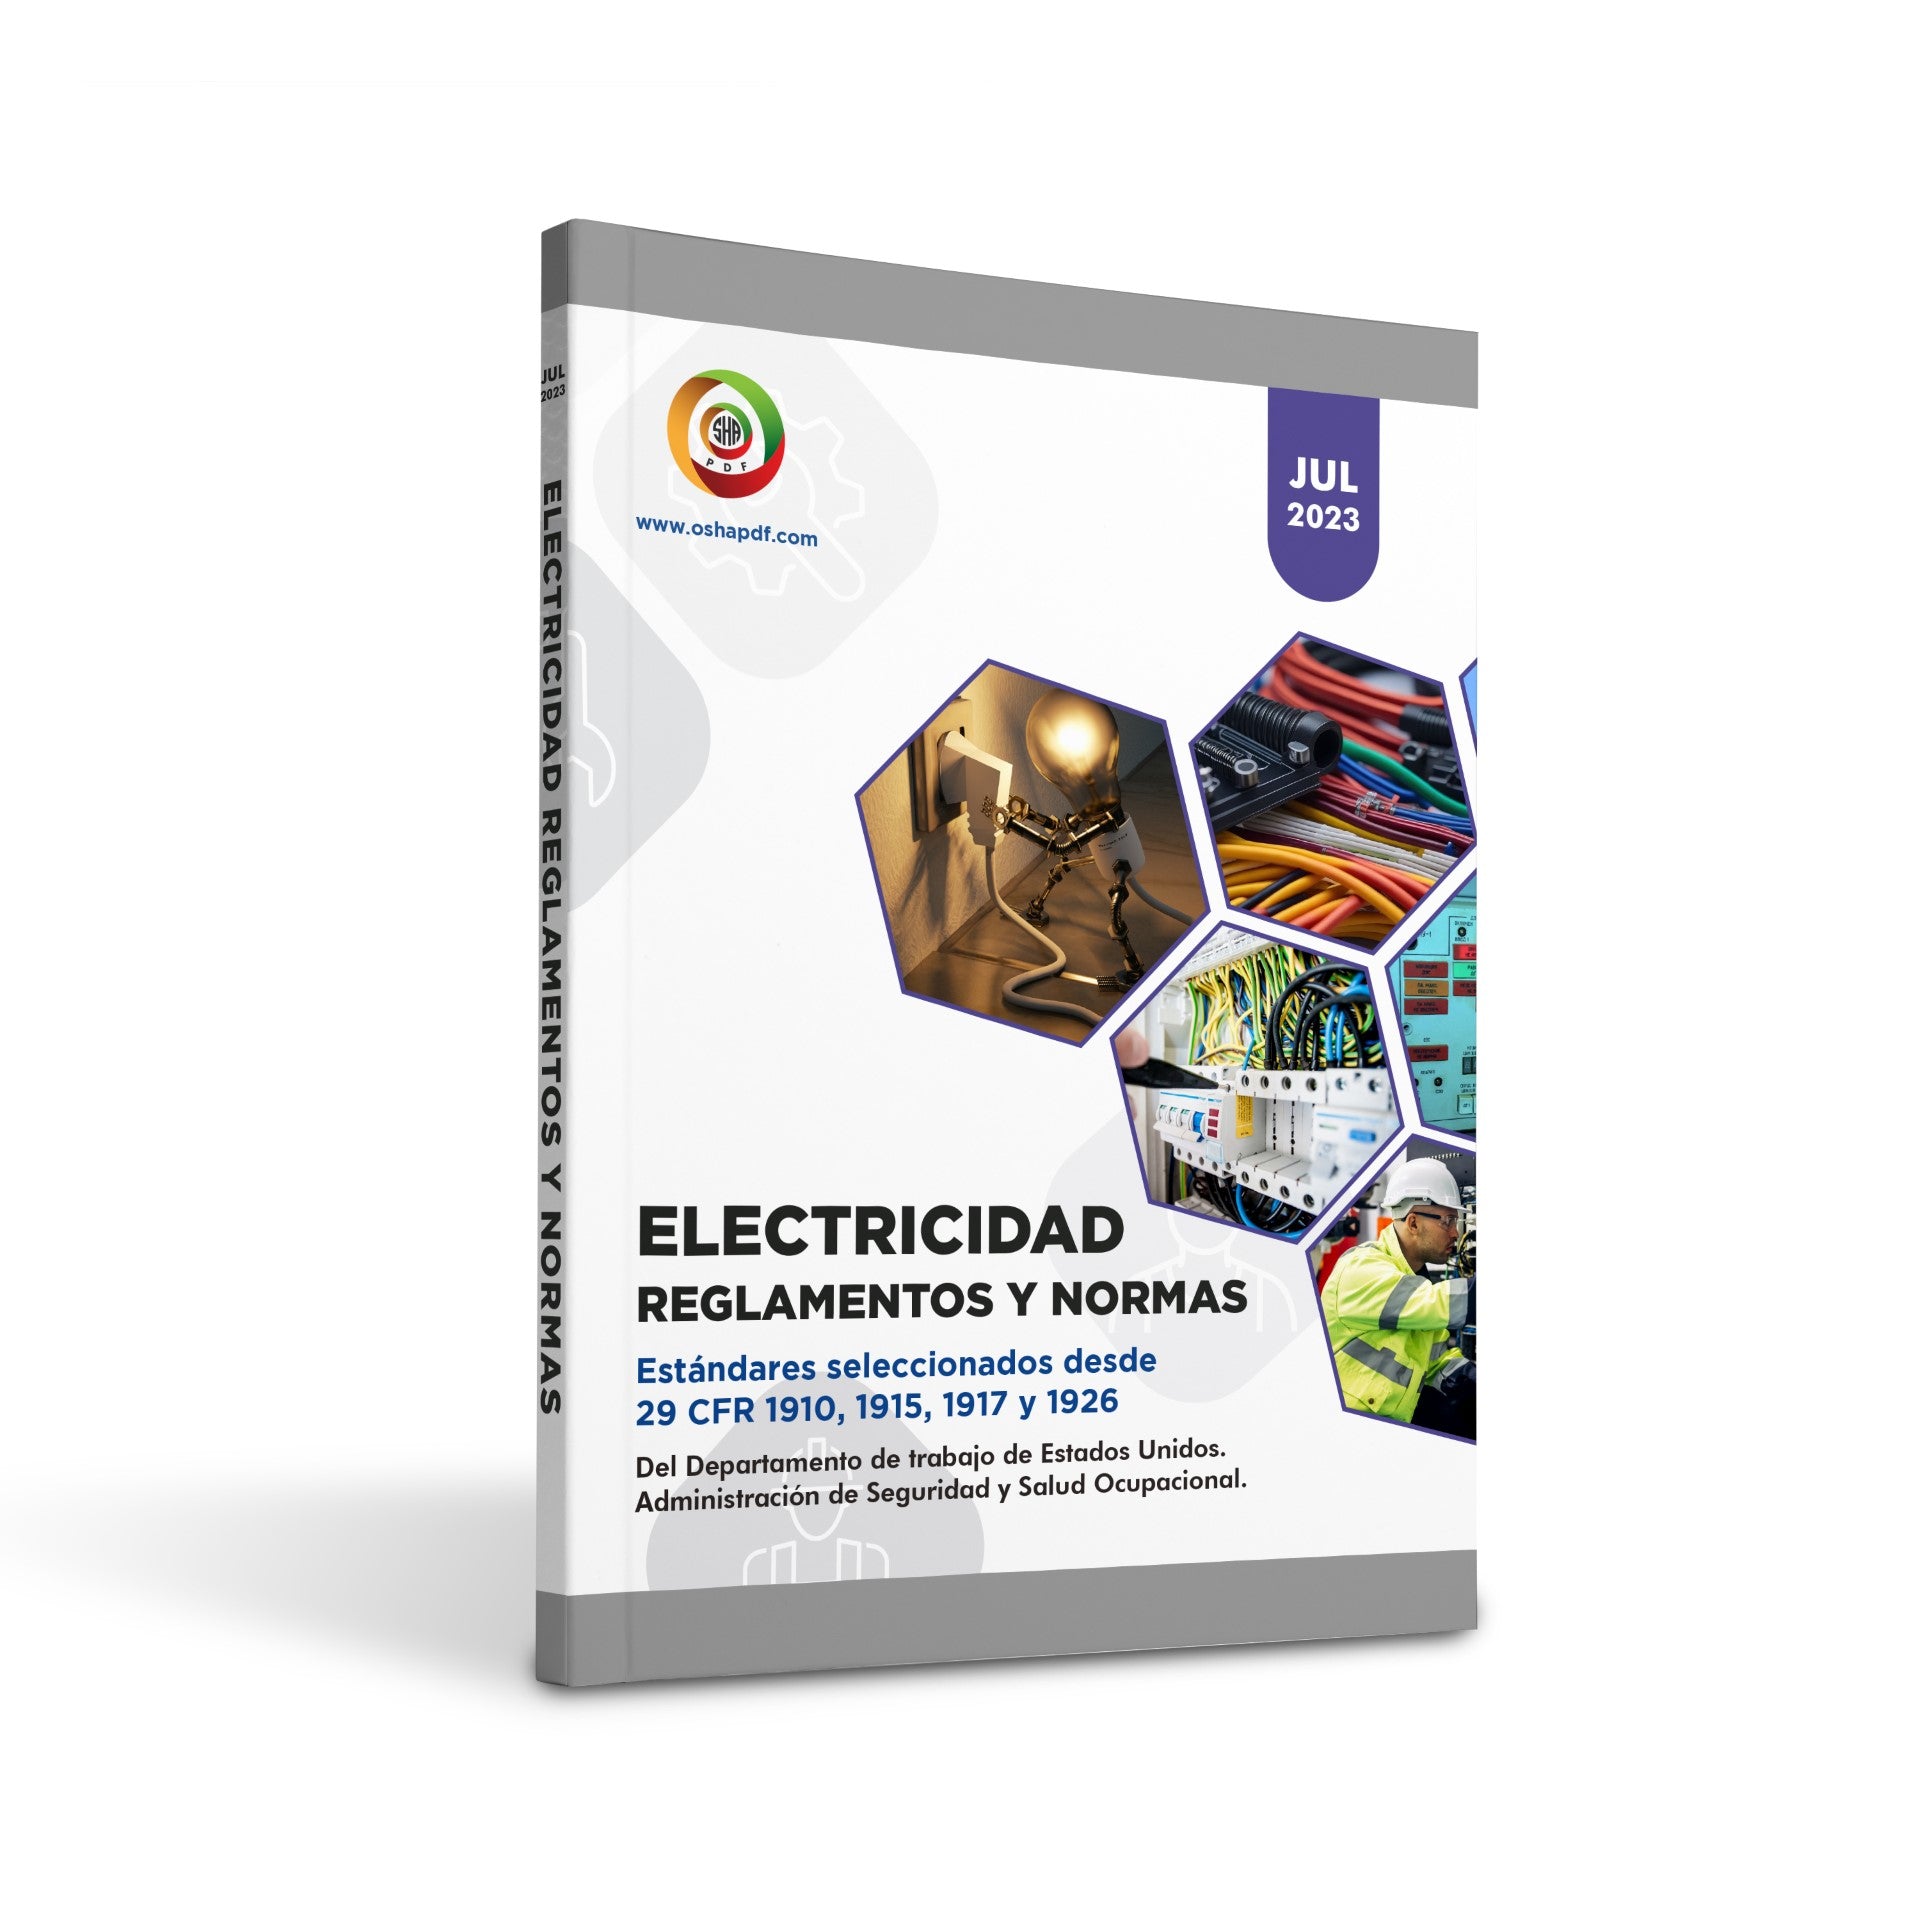 Spanish Electrical Regulations Book July 2023